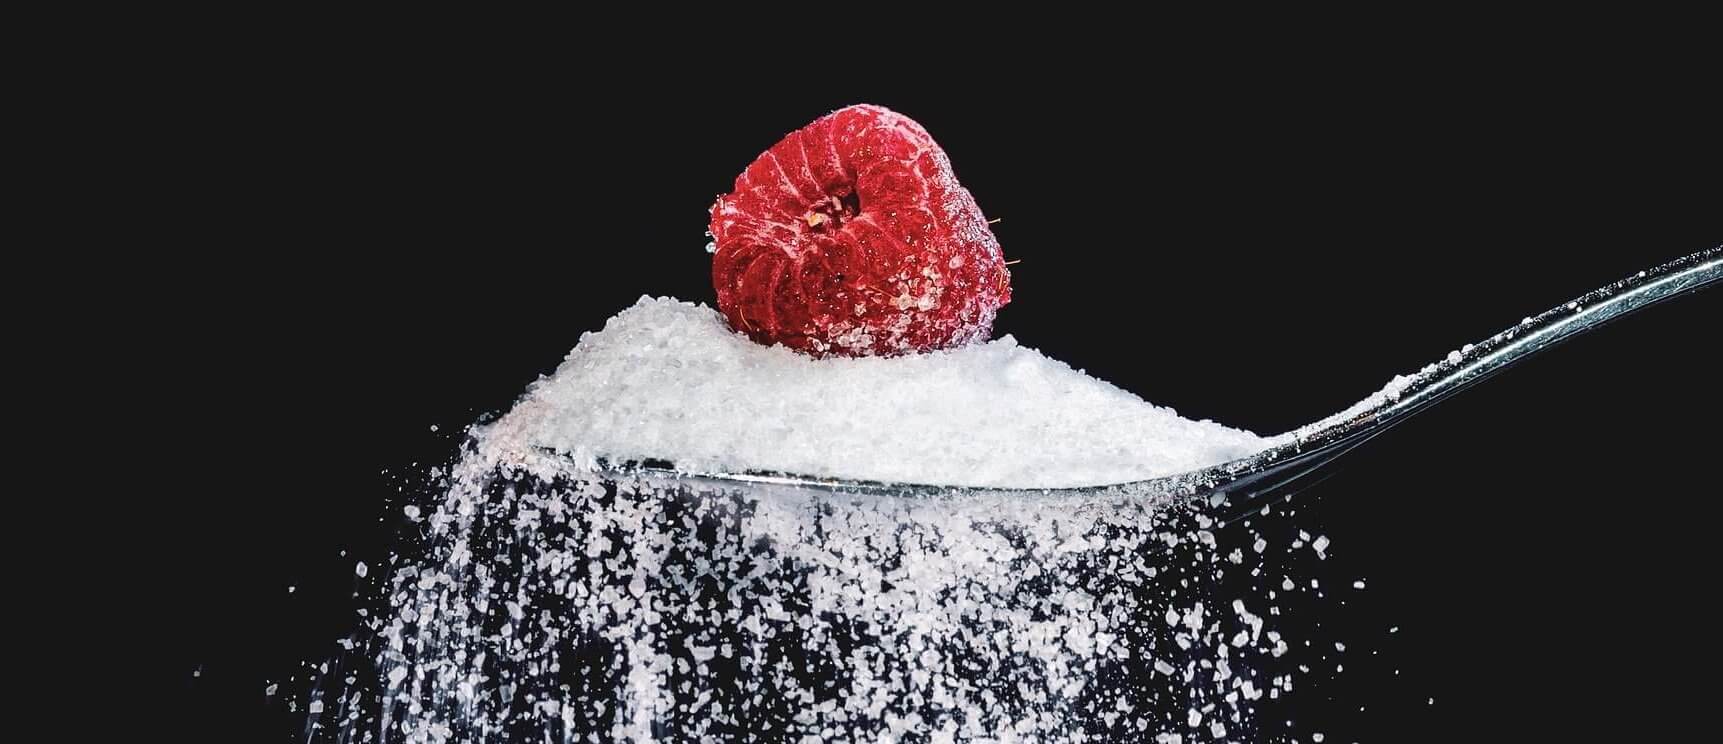 sugar on a spoon with a raspberry on top - sugar allergy